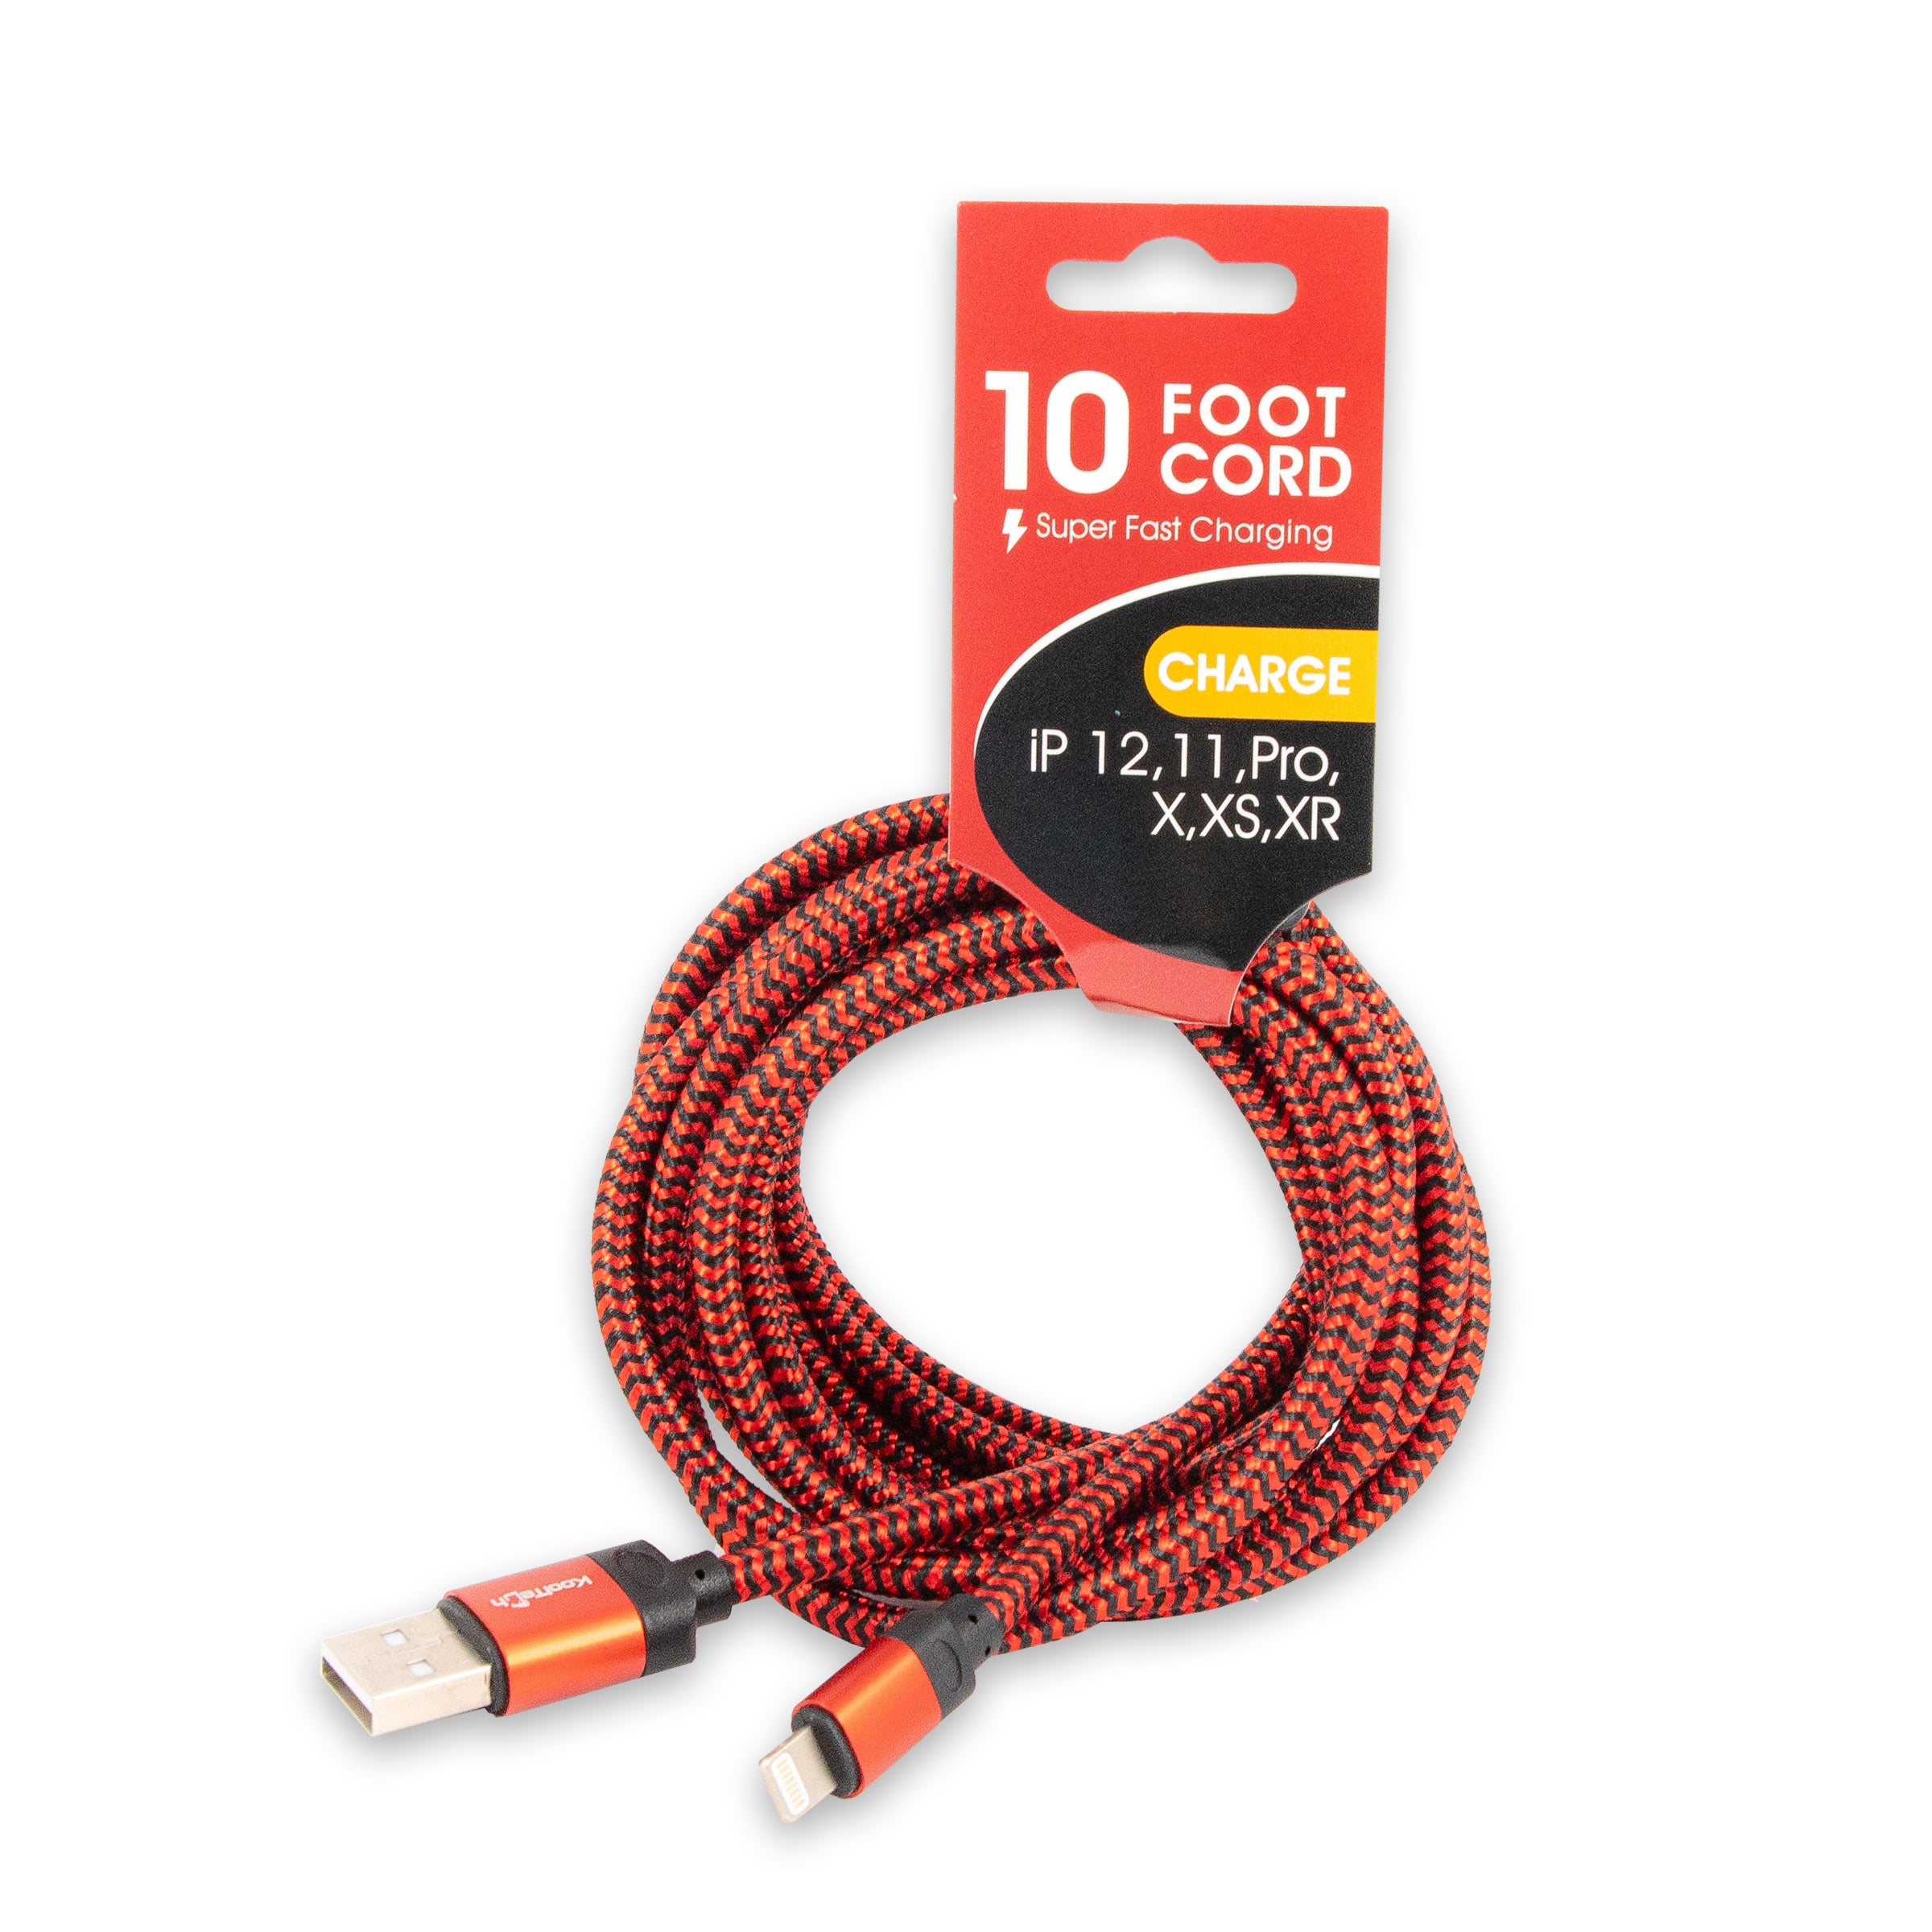 Apple 3.5ft lightning cable - Charge MAXX cables from Emobii.